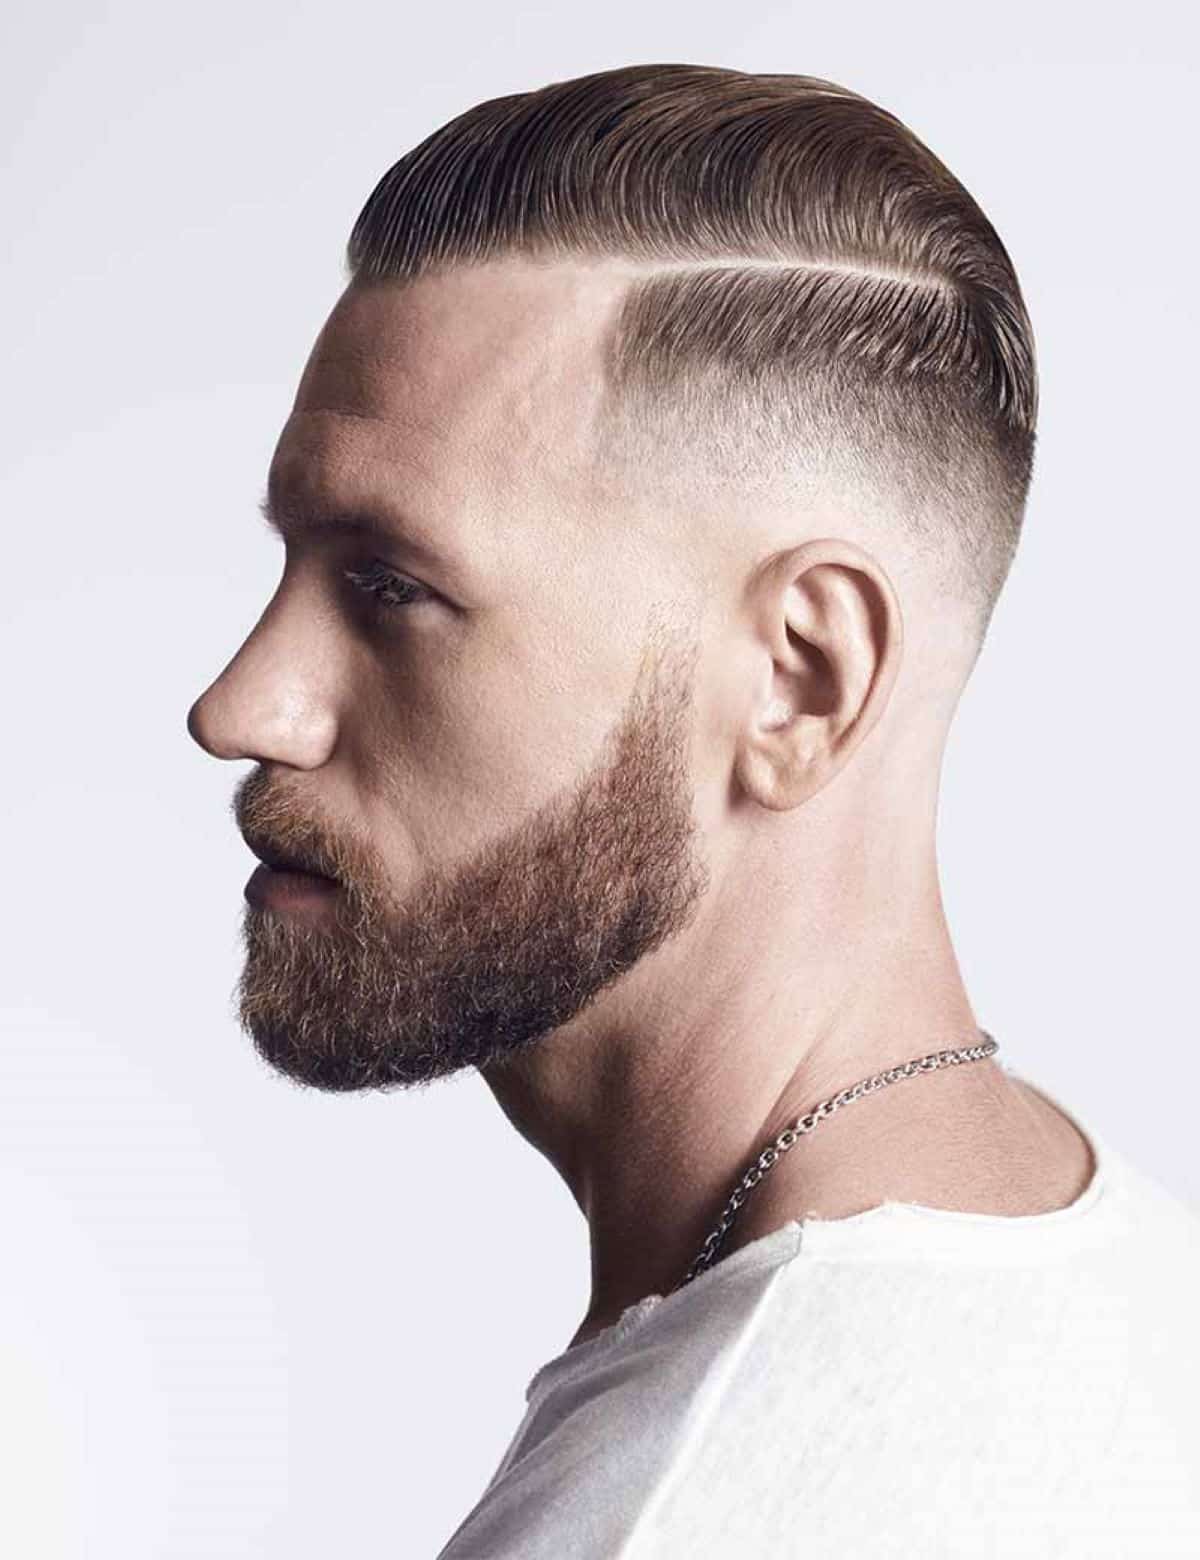 Redken Brews hairstyle and beard side view